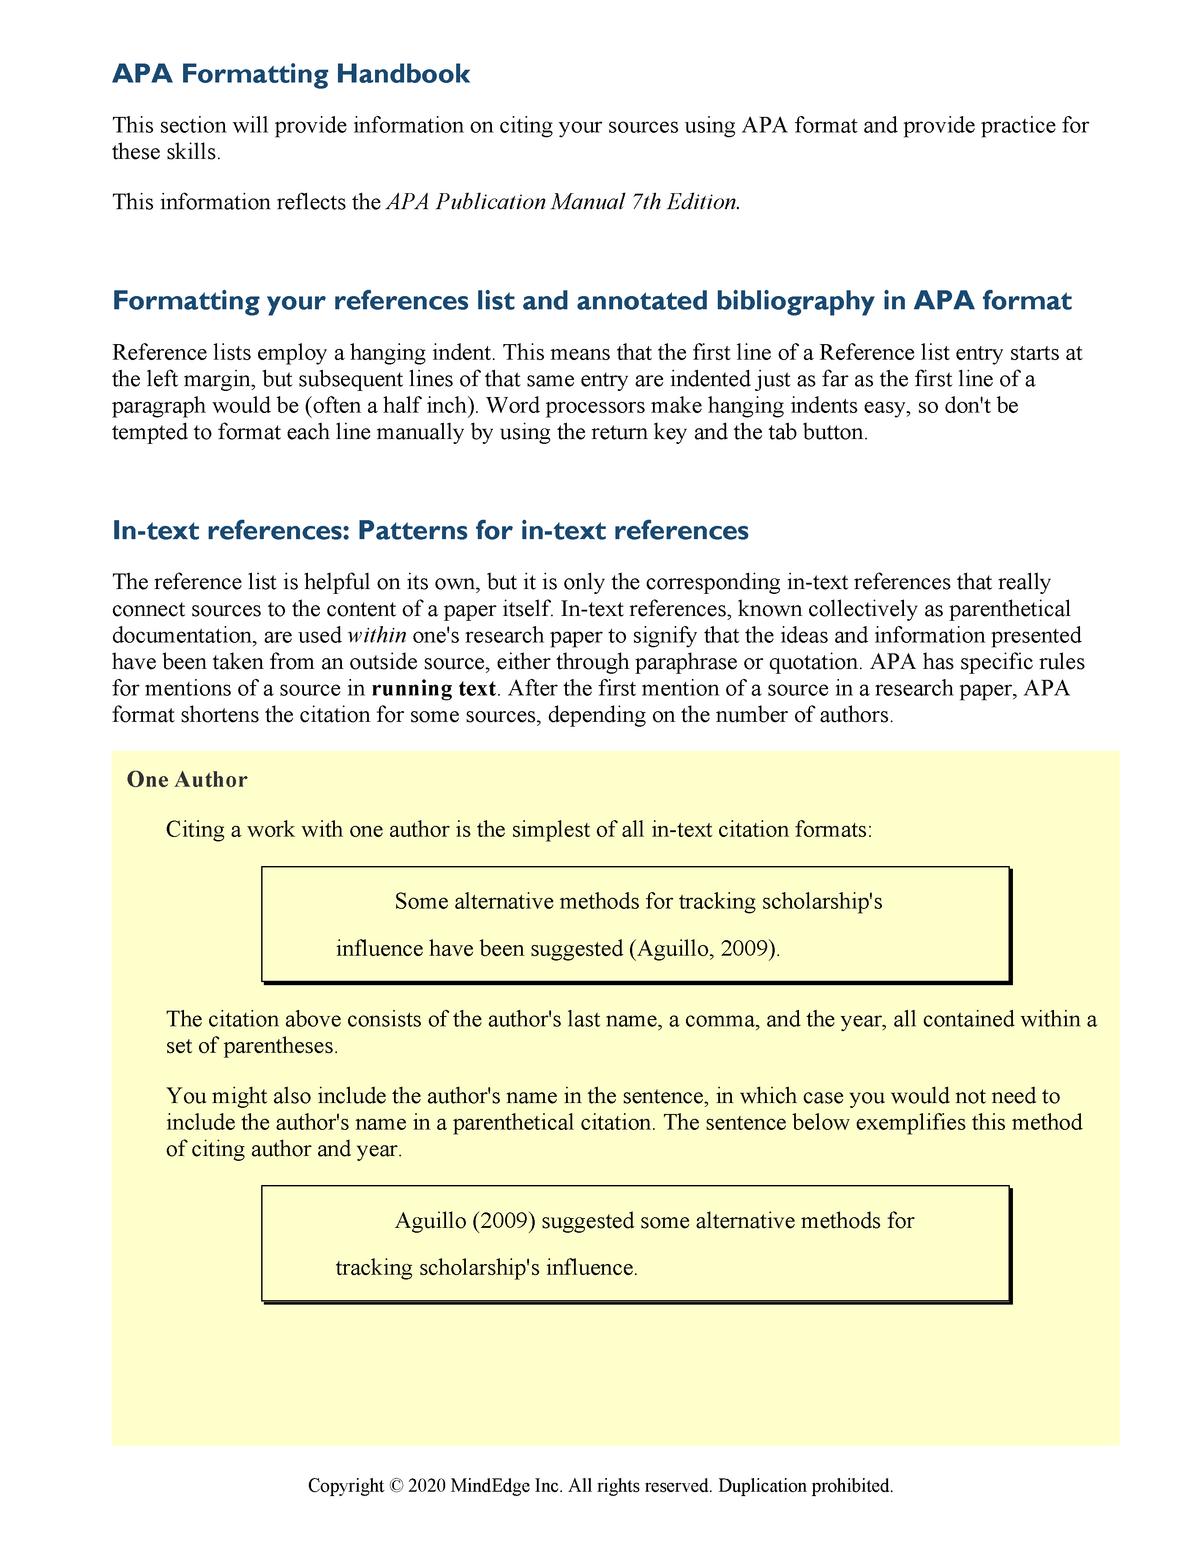 Citation and Referencing - Introduction to APA Style Citation - Archer  Library at University of Regina